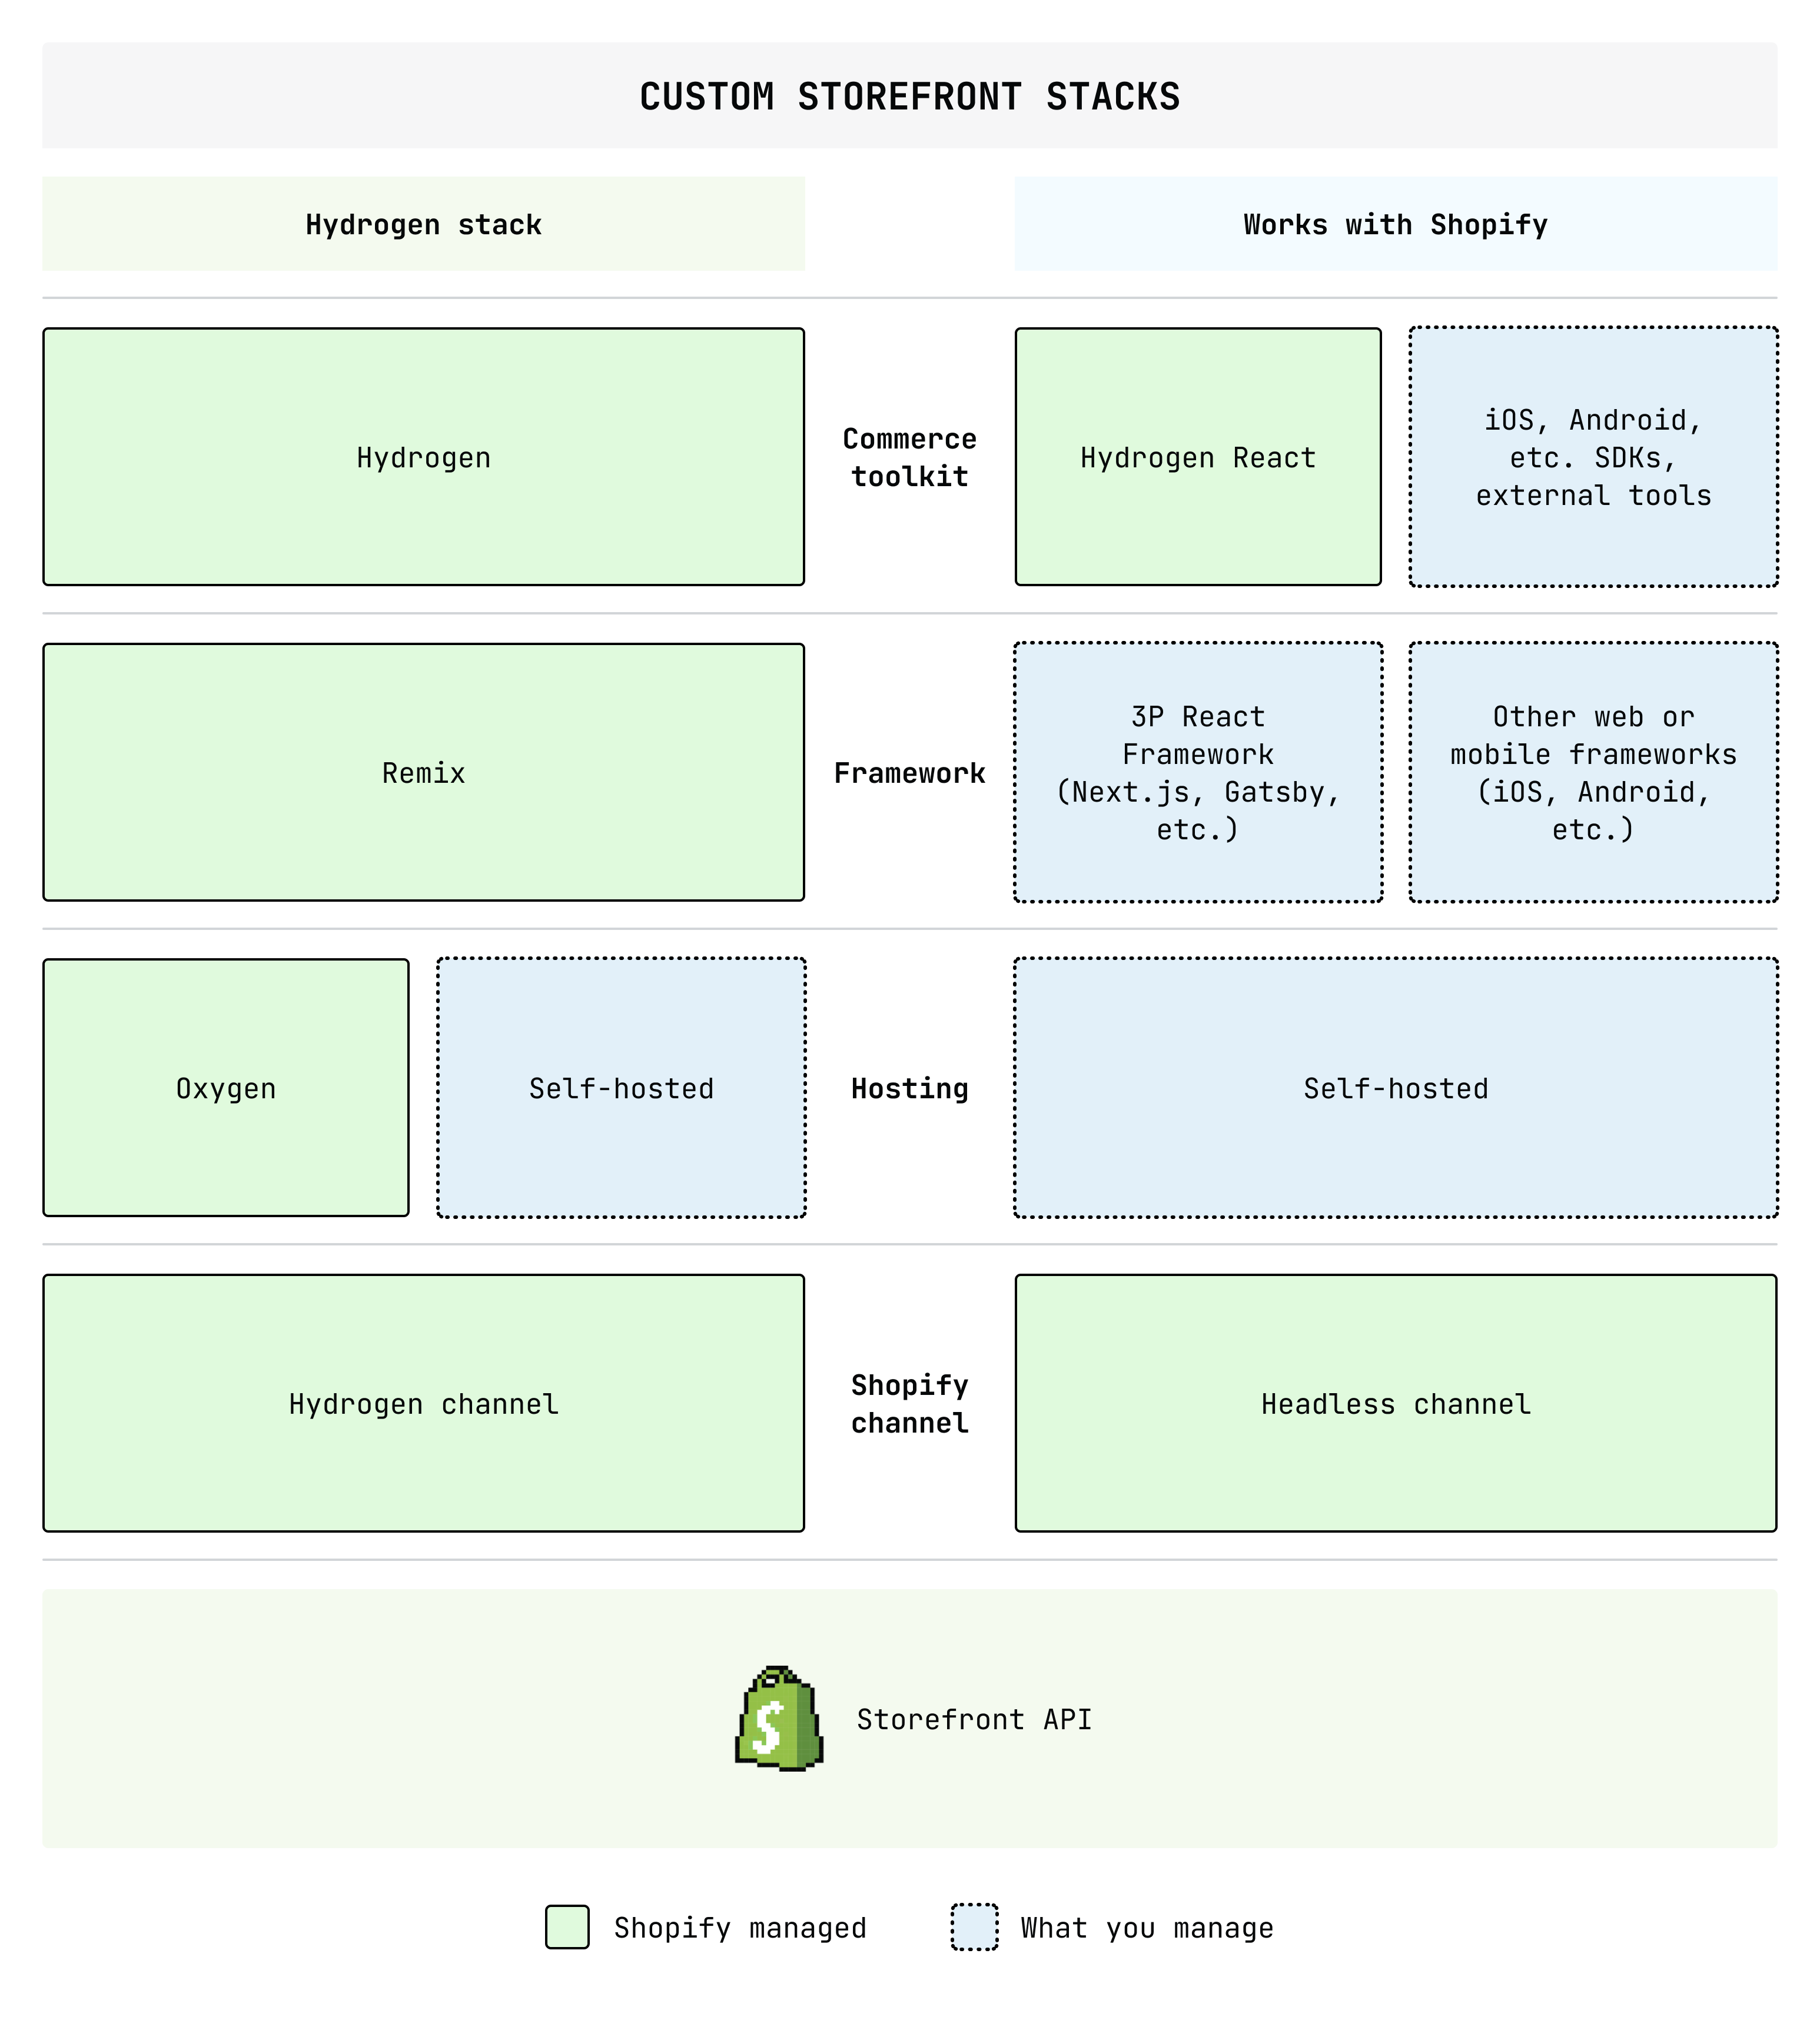 A diagram that outlines custom storefront use cases and corresponding build options